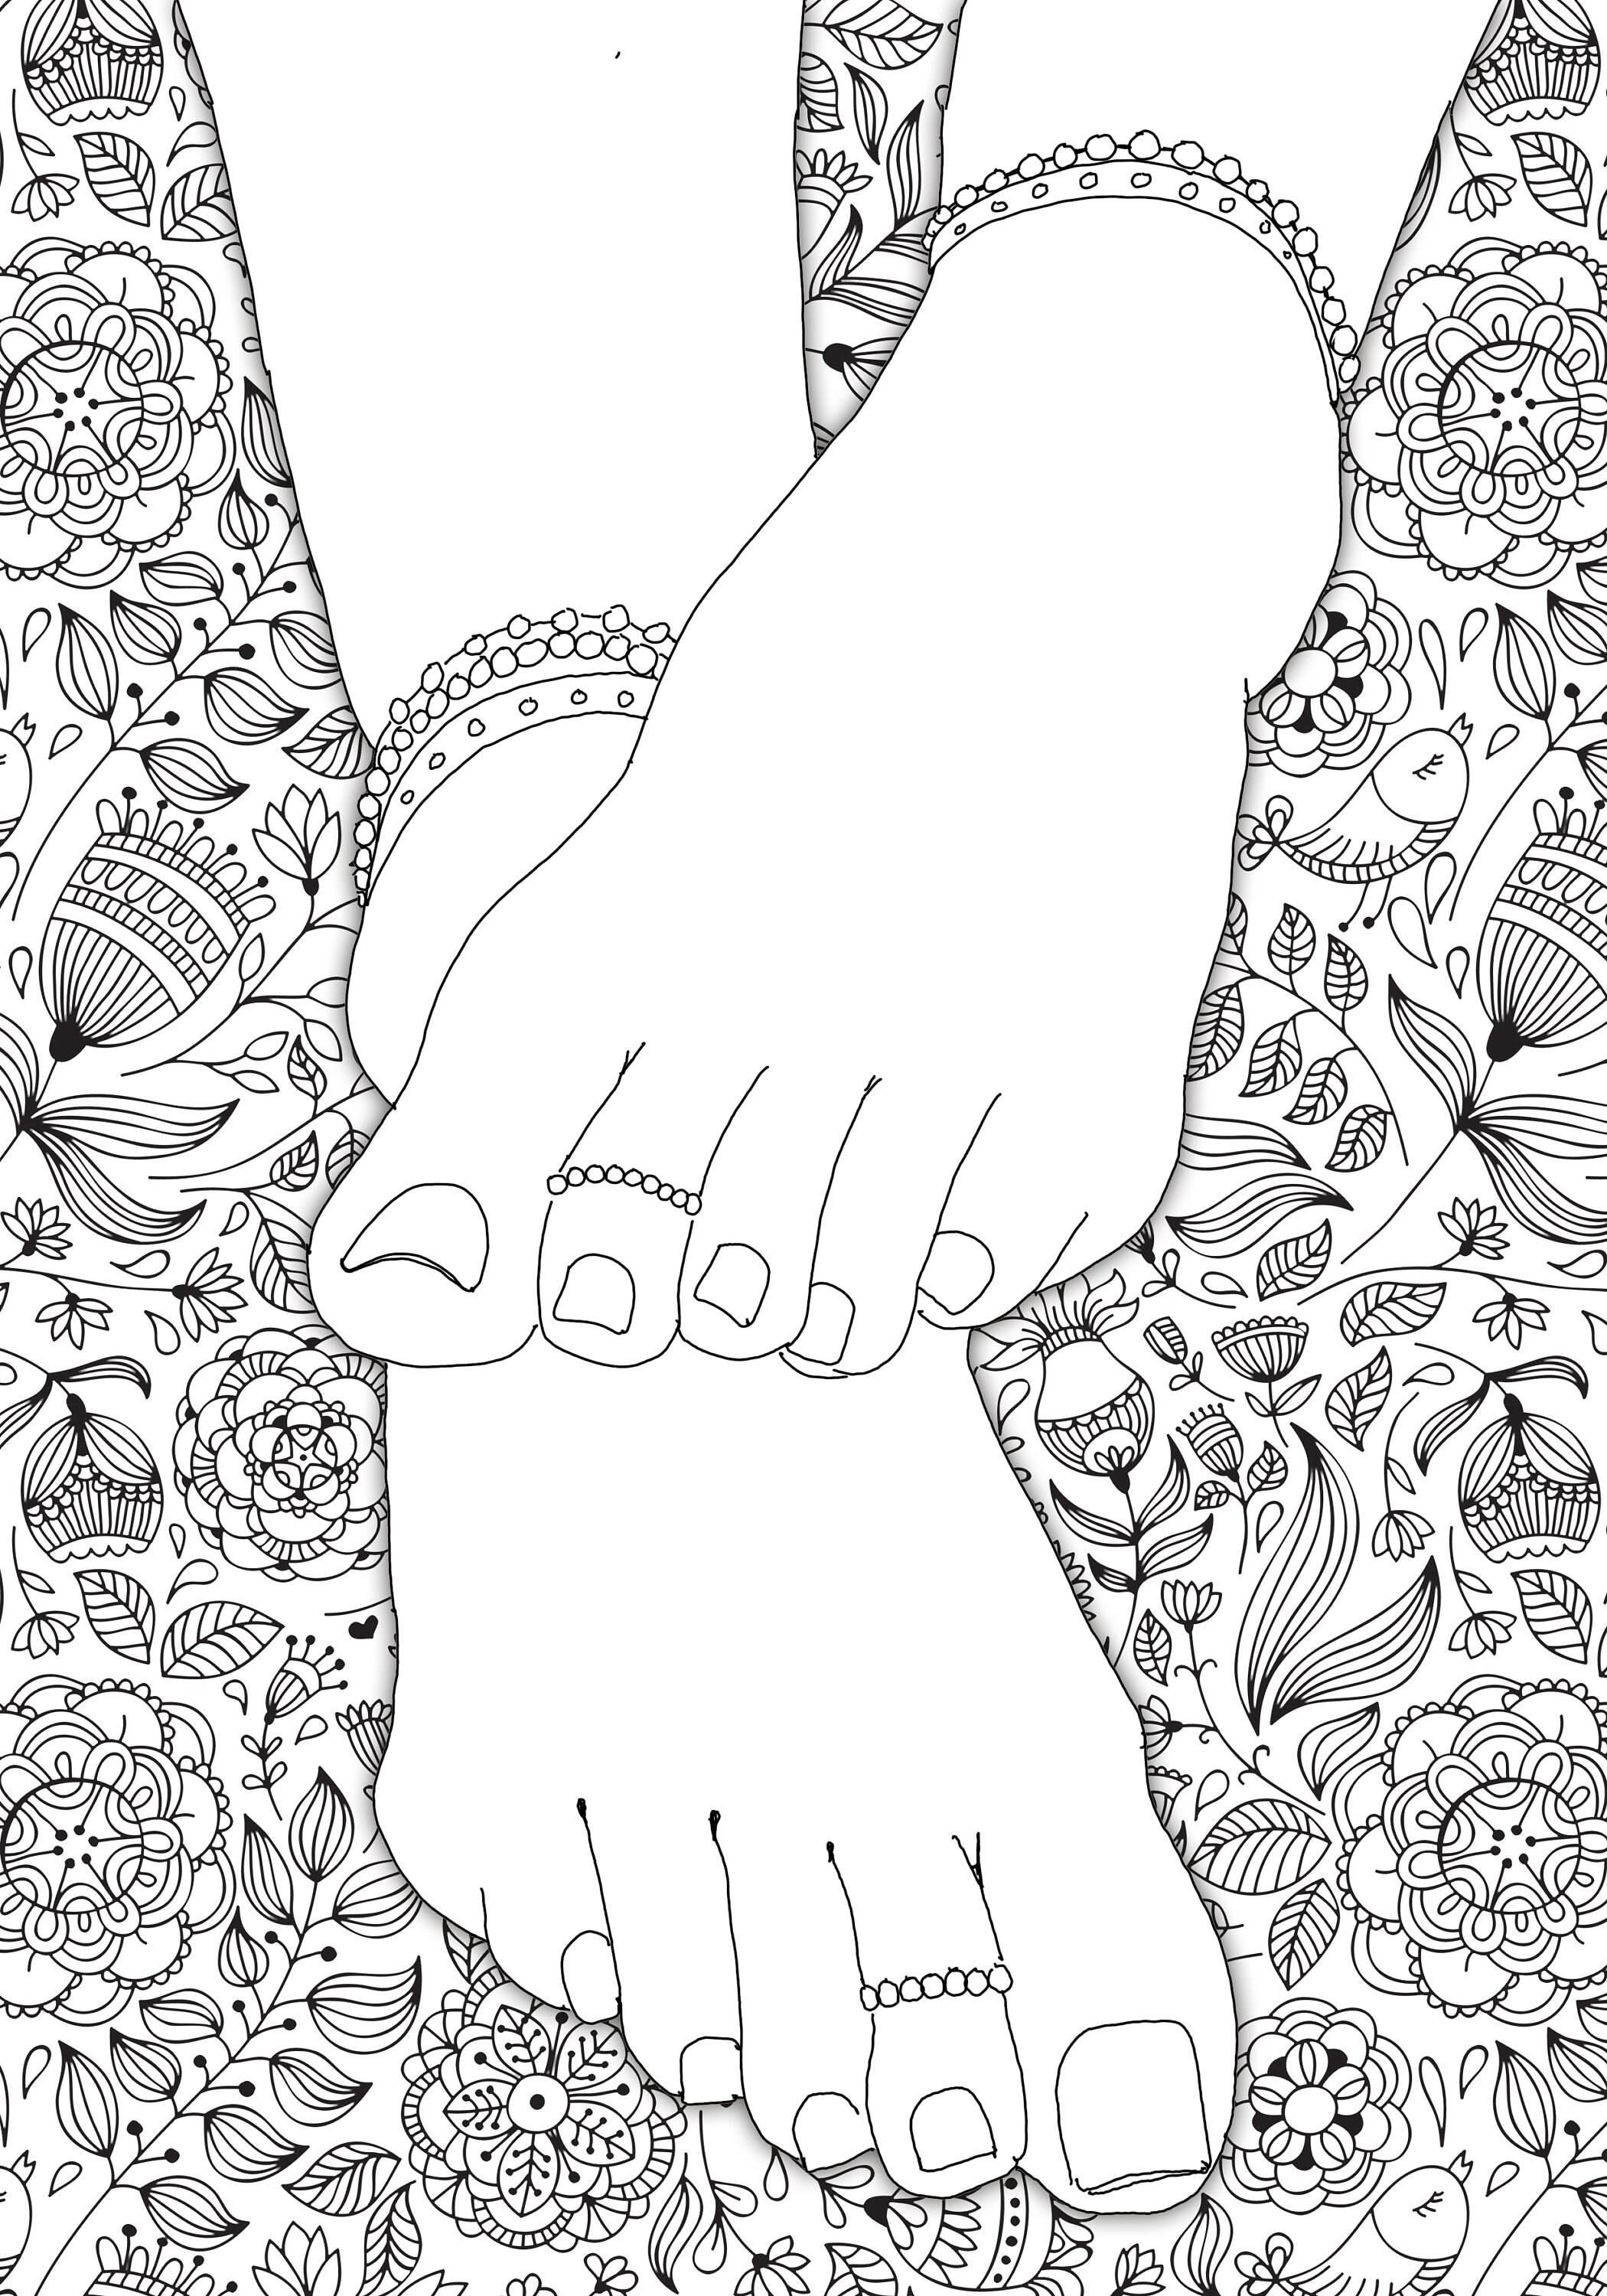 Foot Fetish Erotic Coloring Book for Adults Erotic Coloring - Etsy